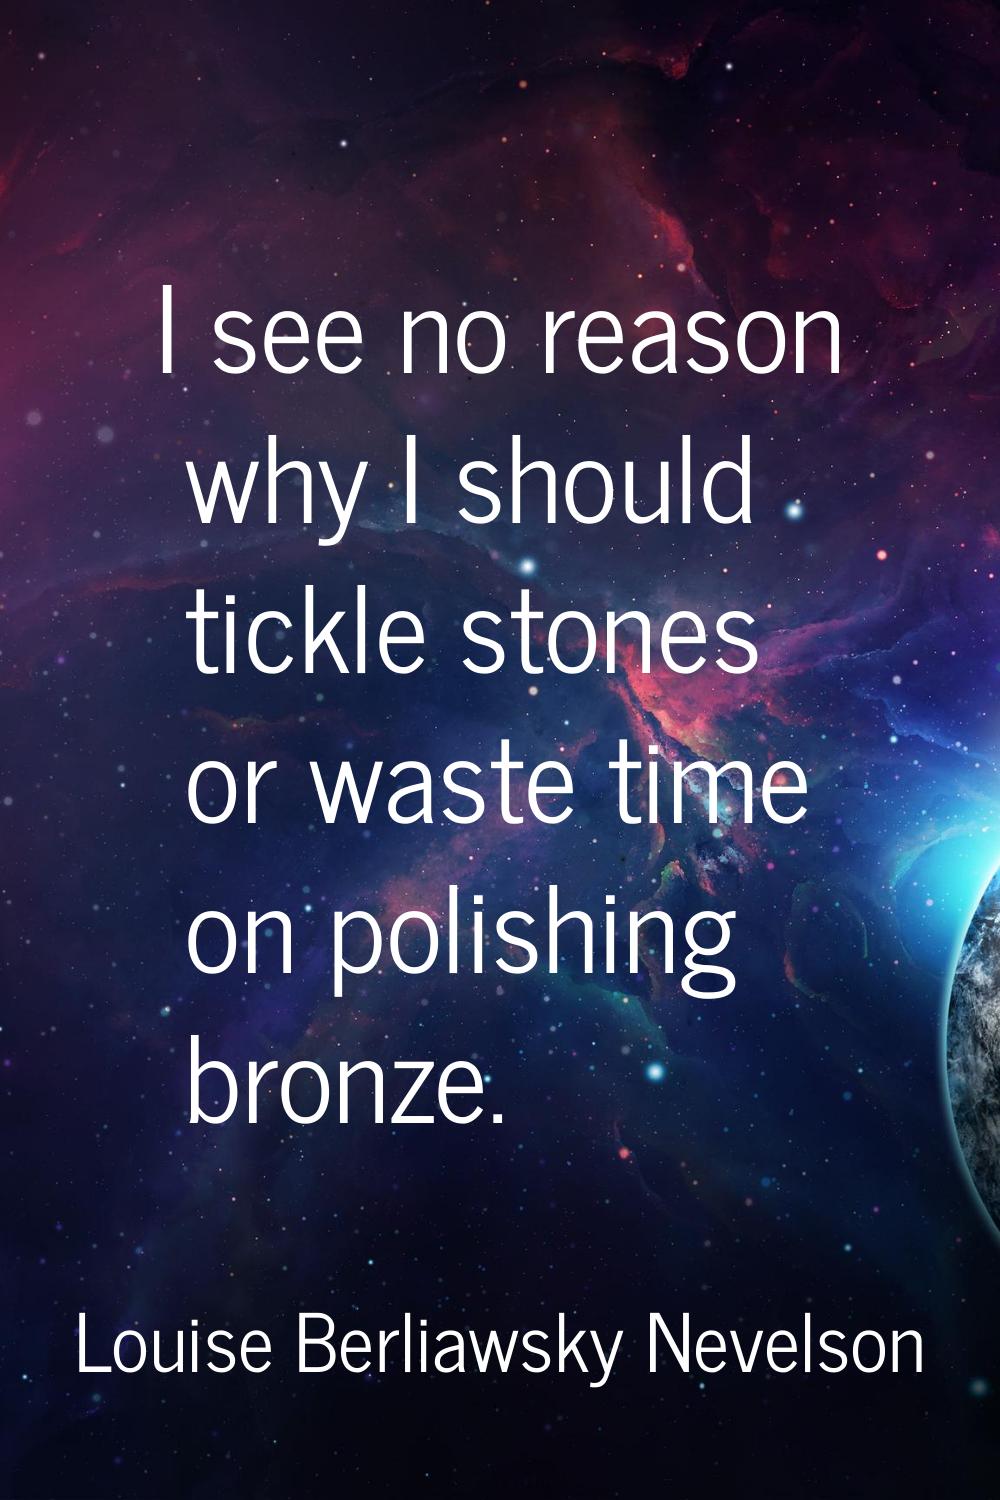 I see no reason why I should tickle stones or waste time on polishing bronze.